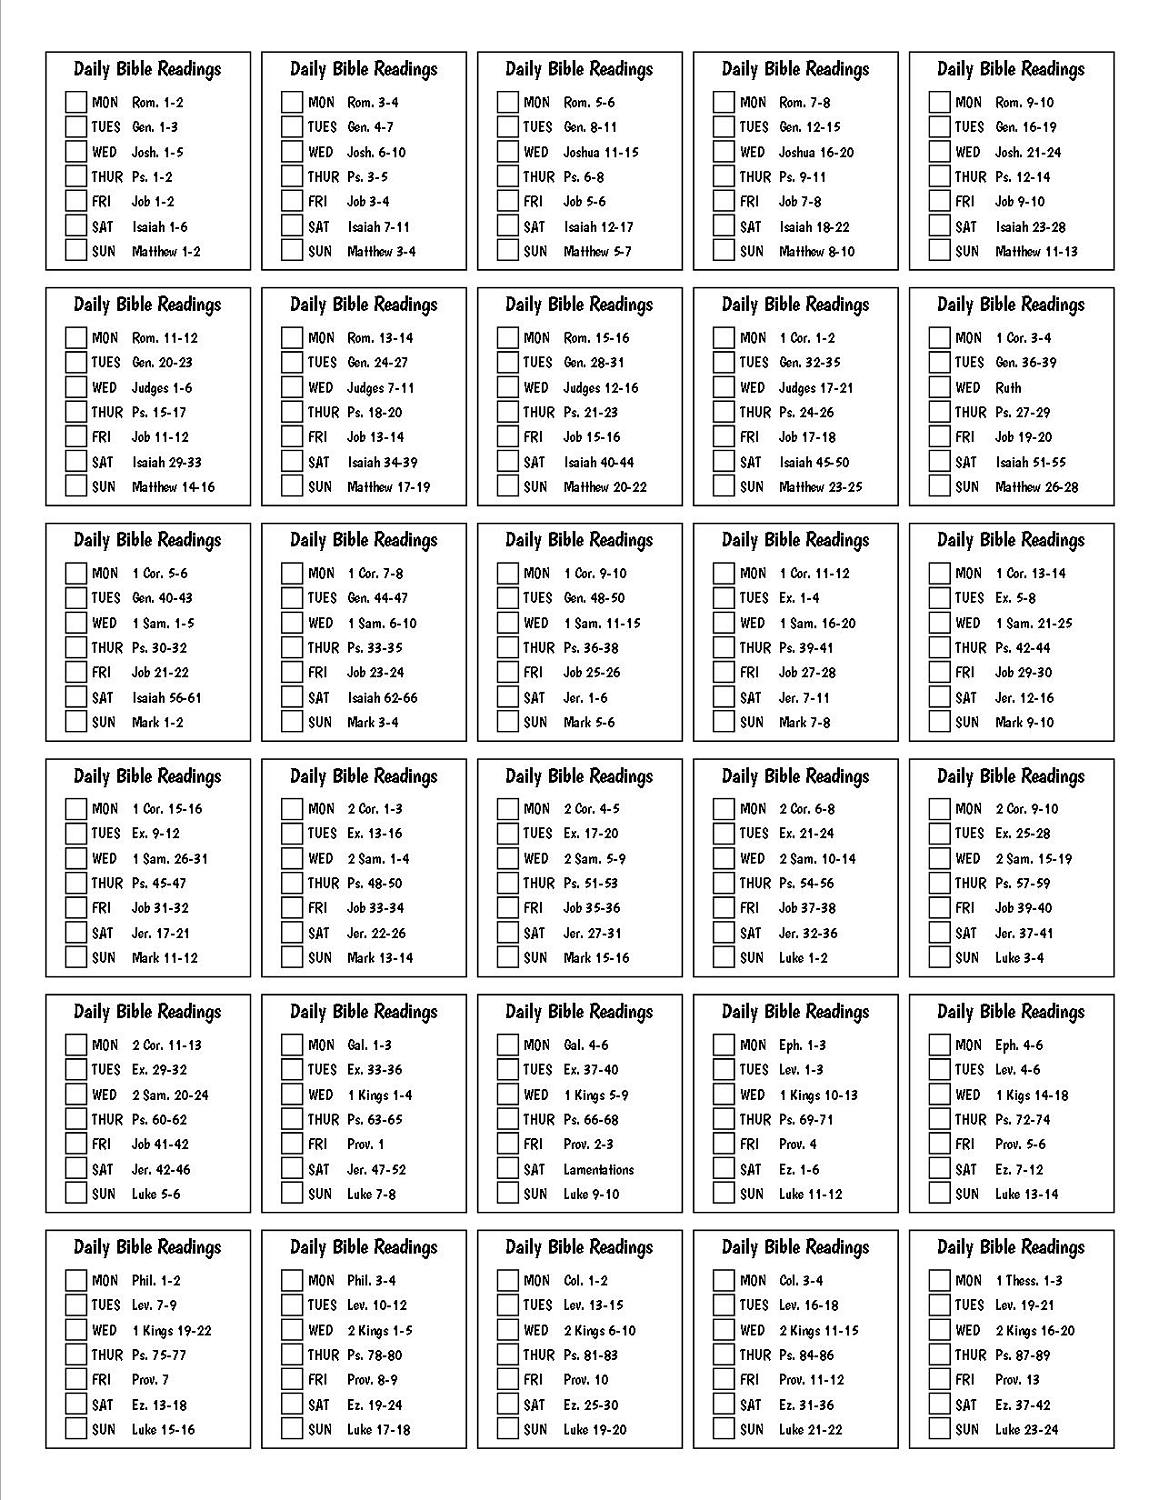 Printable Bible Reading Plan Weekly by Section